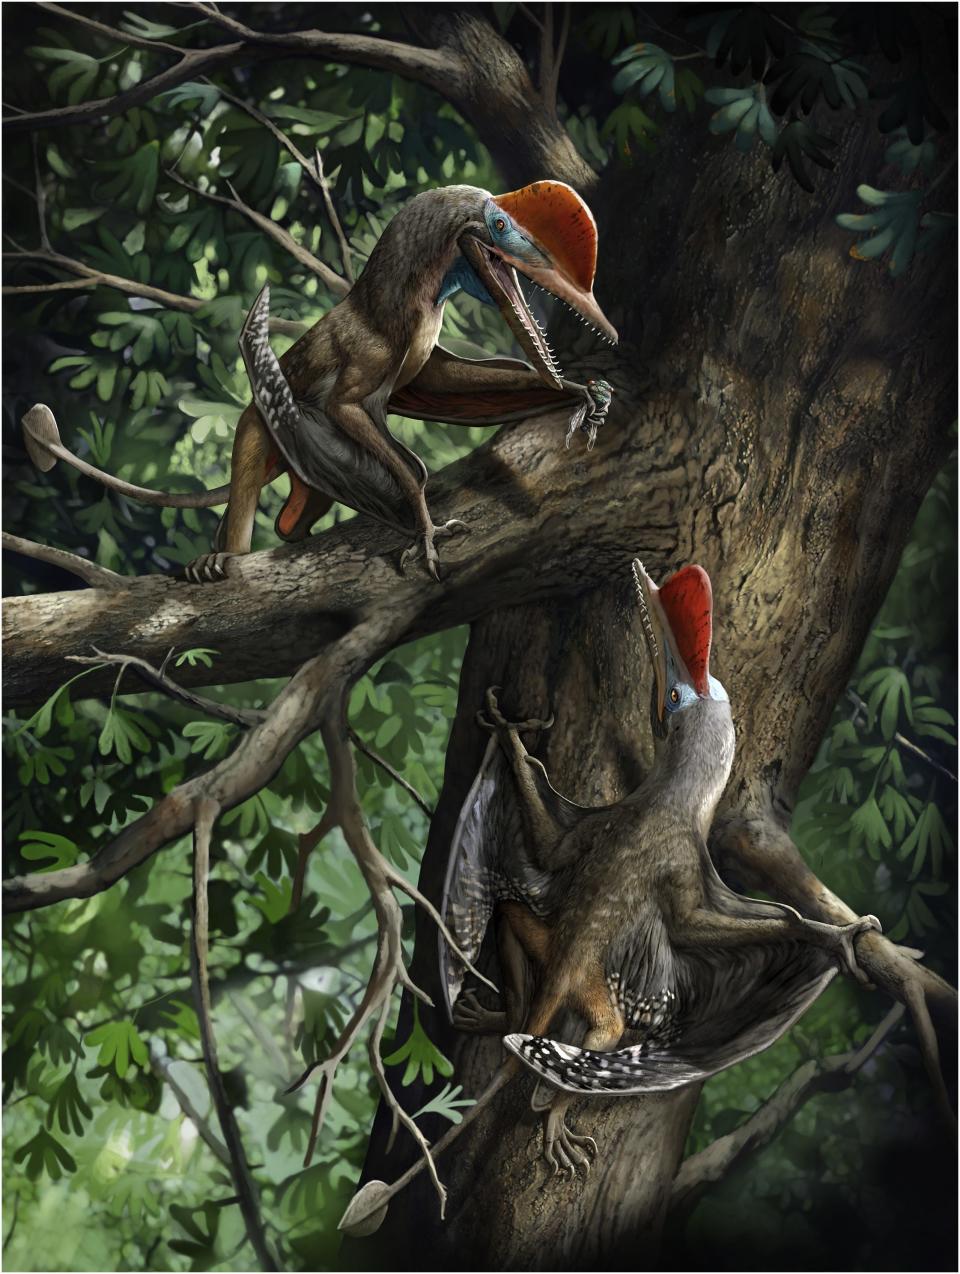 A reconstruction of  how the K. antipollicatus or 'Monkeydactyl' used the opposed pollex.